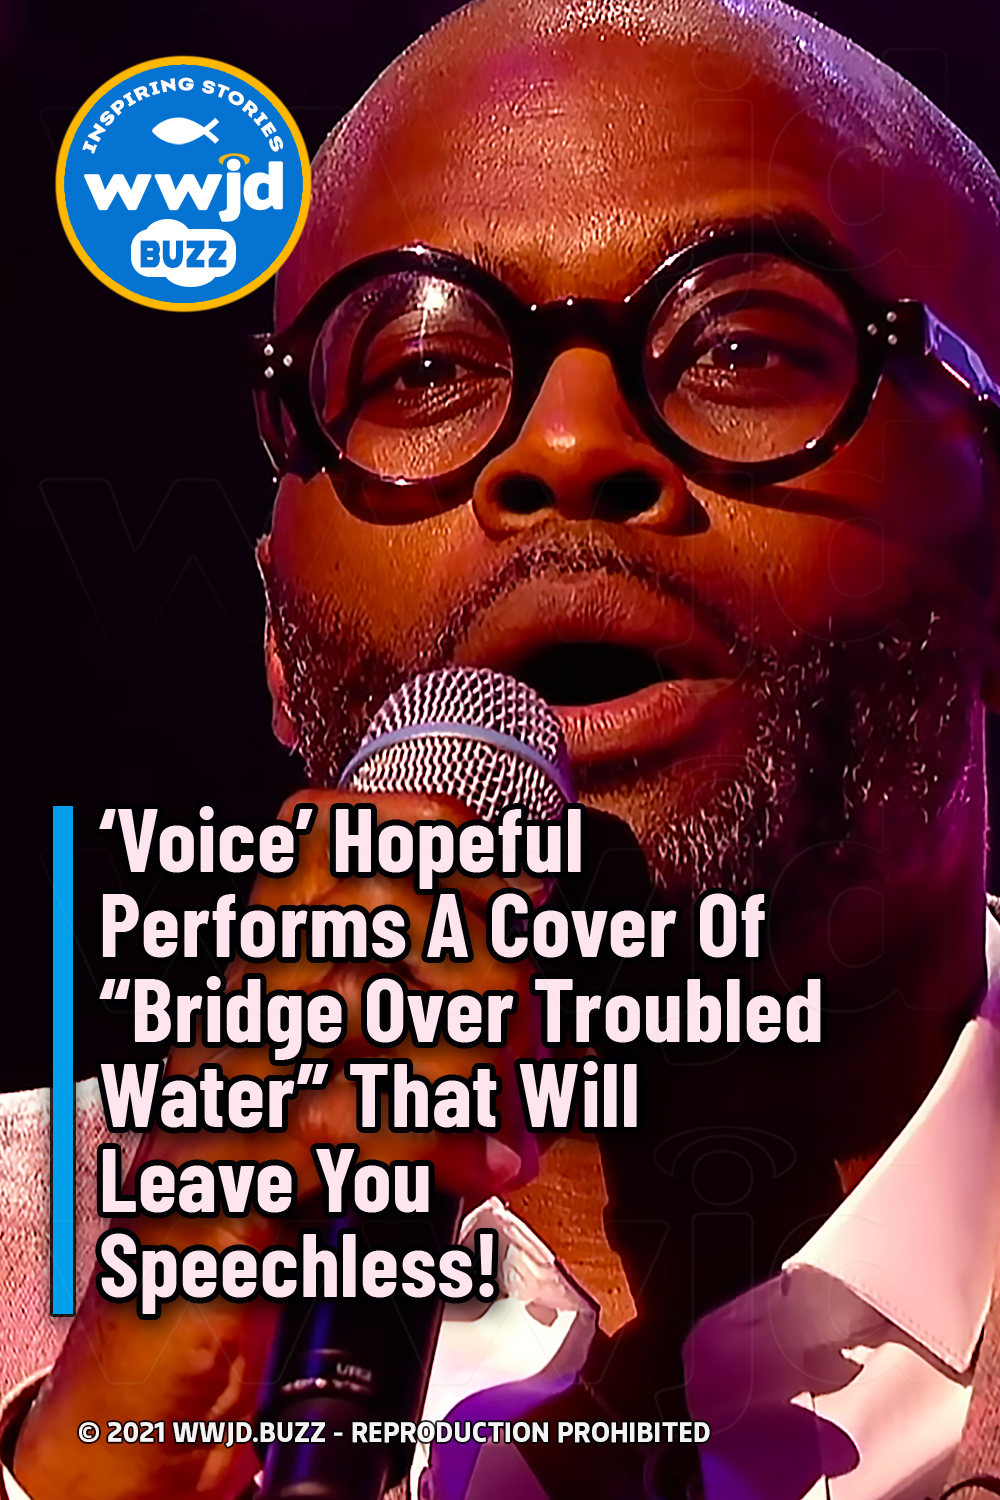 \'Voice\' Hopeful Performs A Cover Of “Bridge Over Troubled Water” That Will Leave You Speechless!